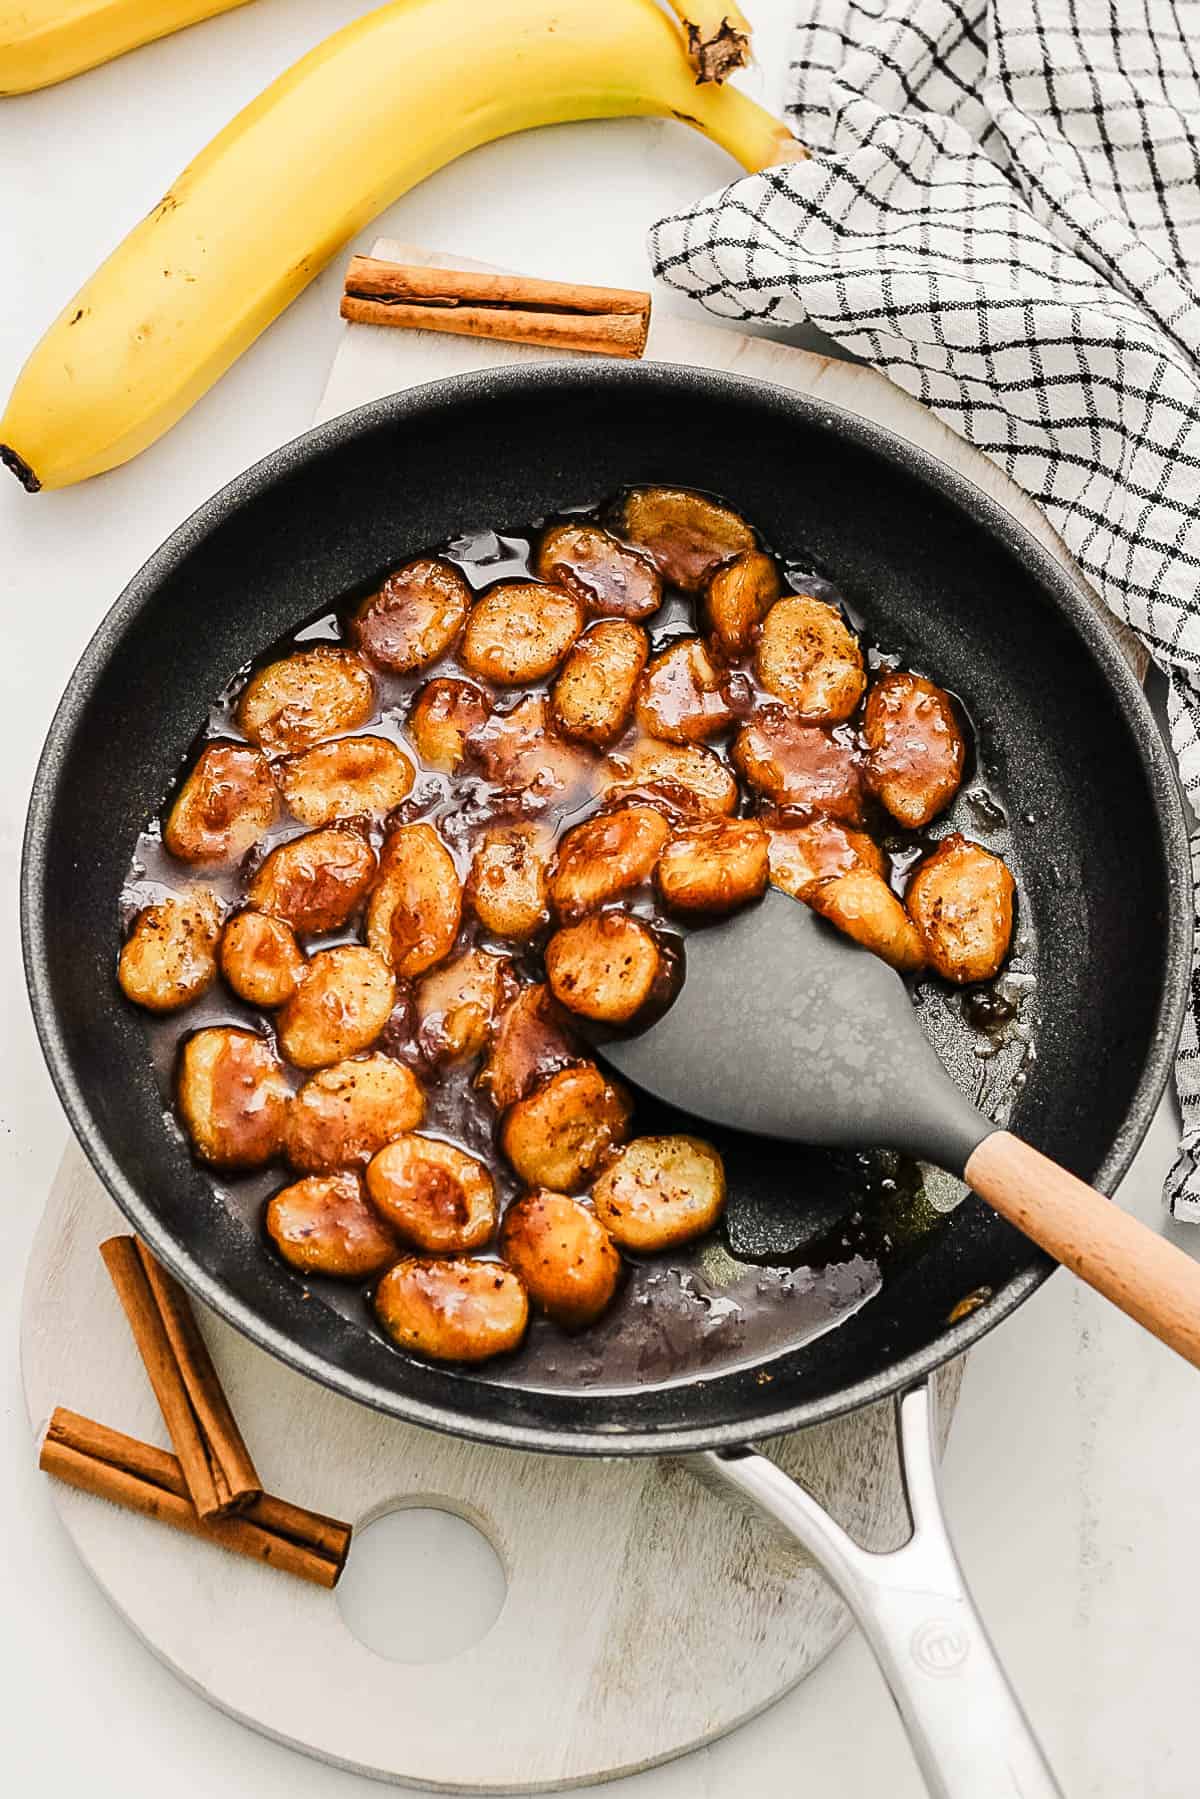 Caramelized bananas in a large s،et.